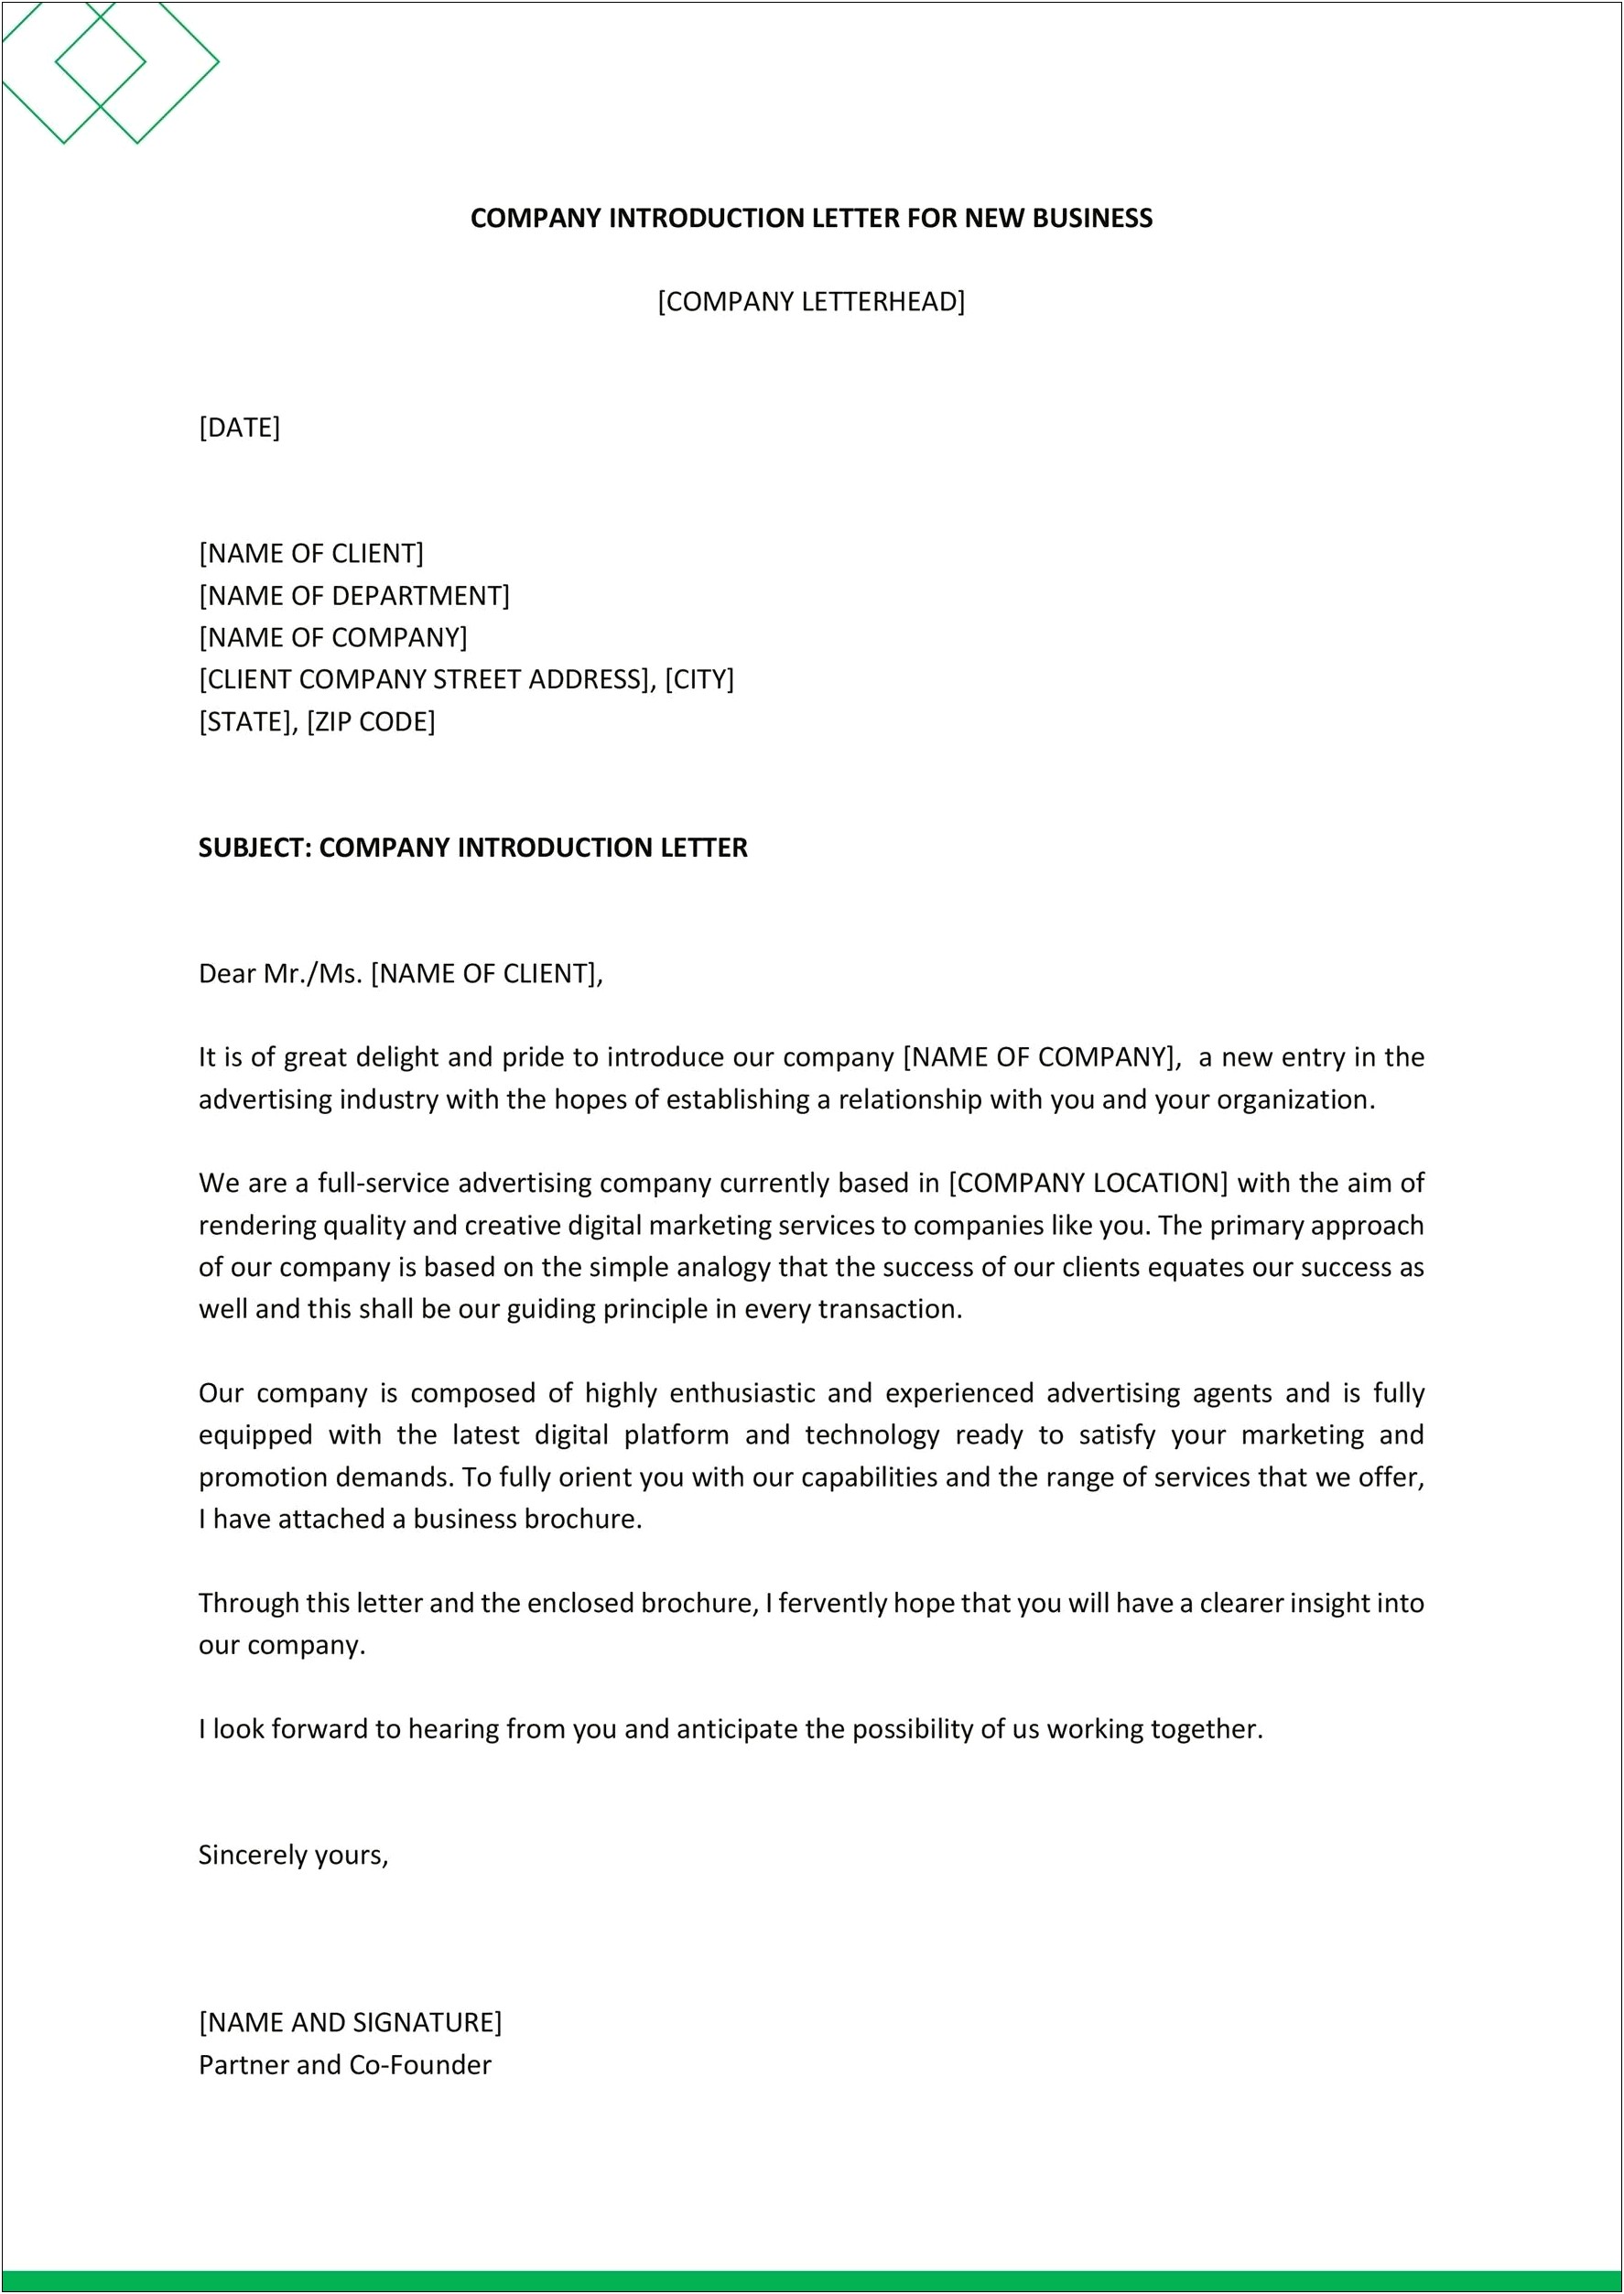 Business Letter Template Introducing Your Company